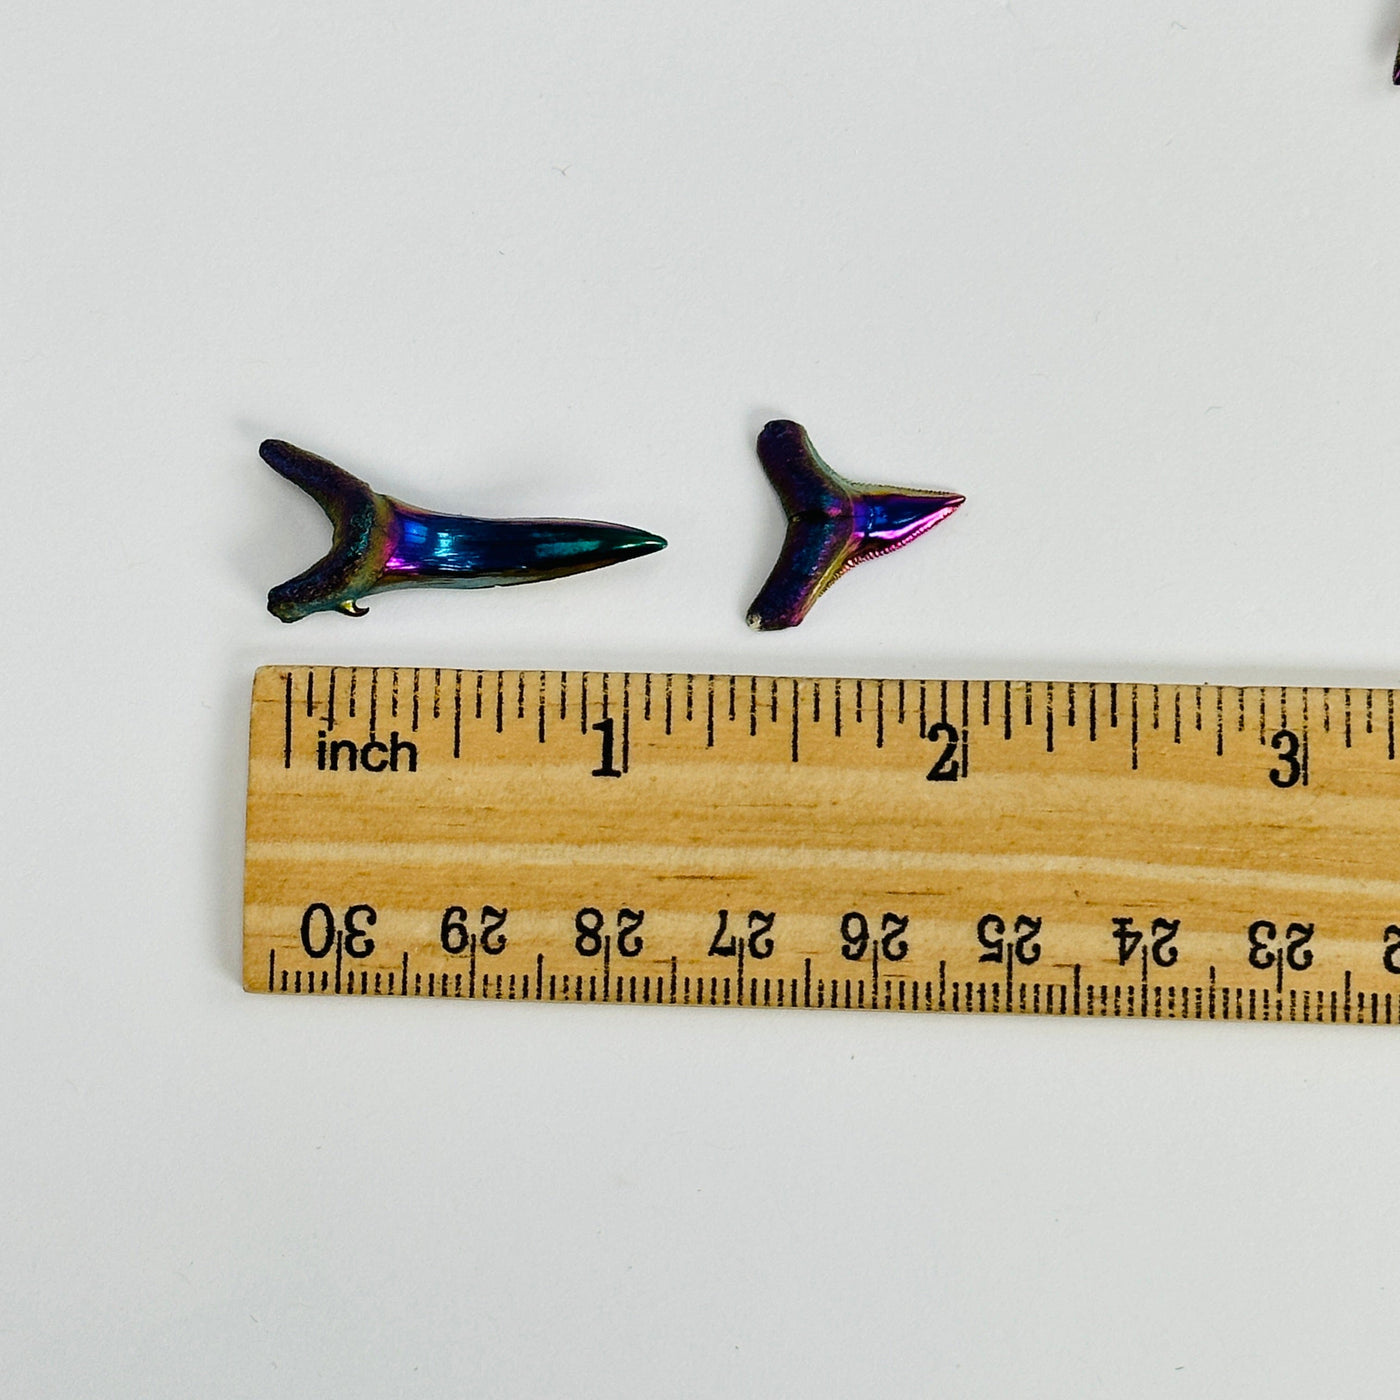 mystic green and purple titanium coated shark teeth next to a ruler for size reference